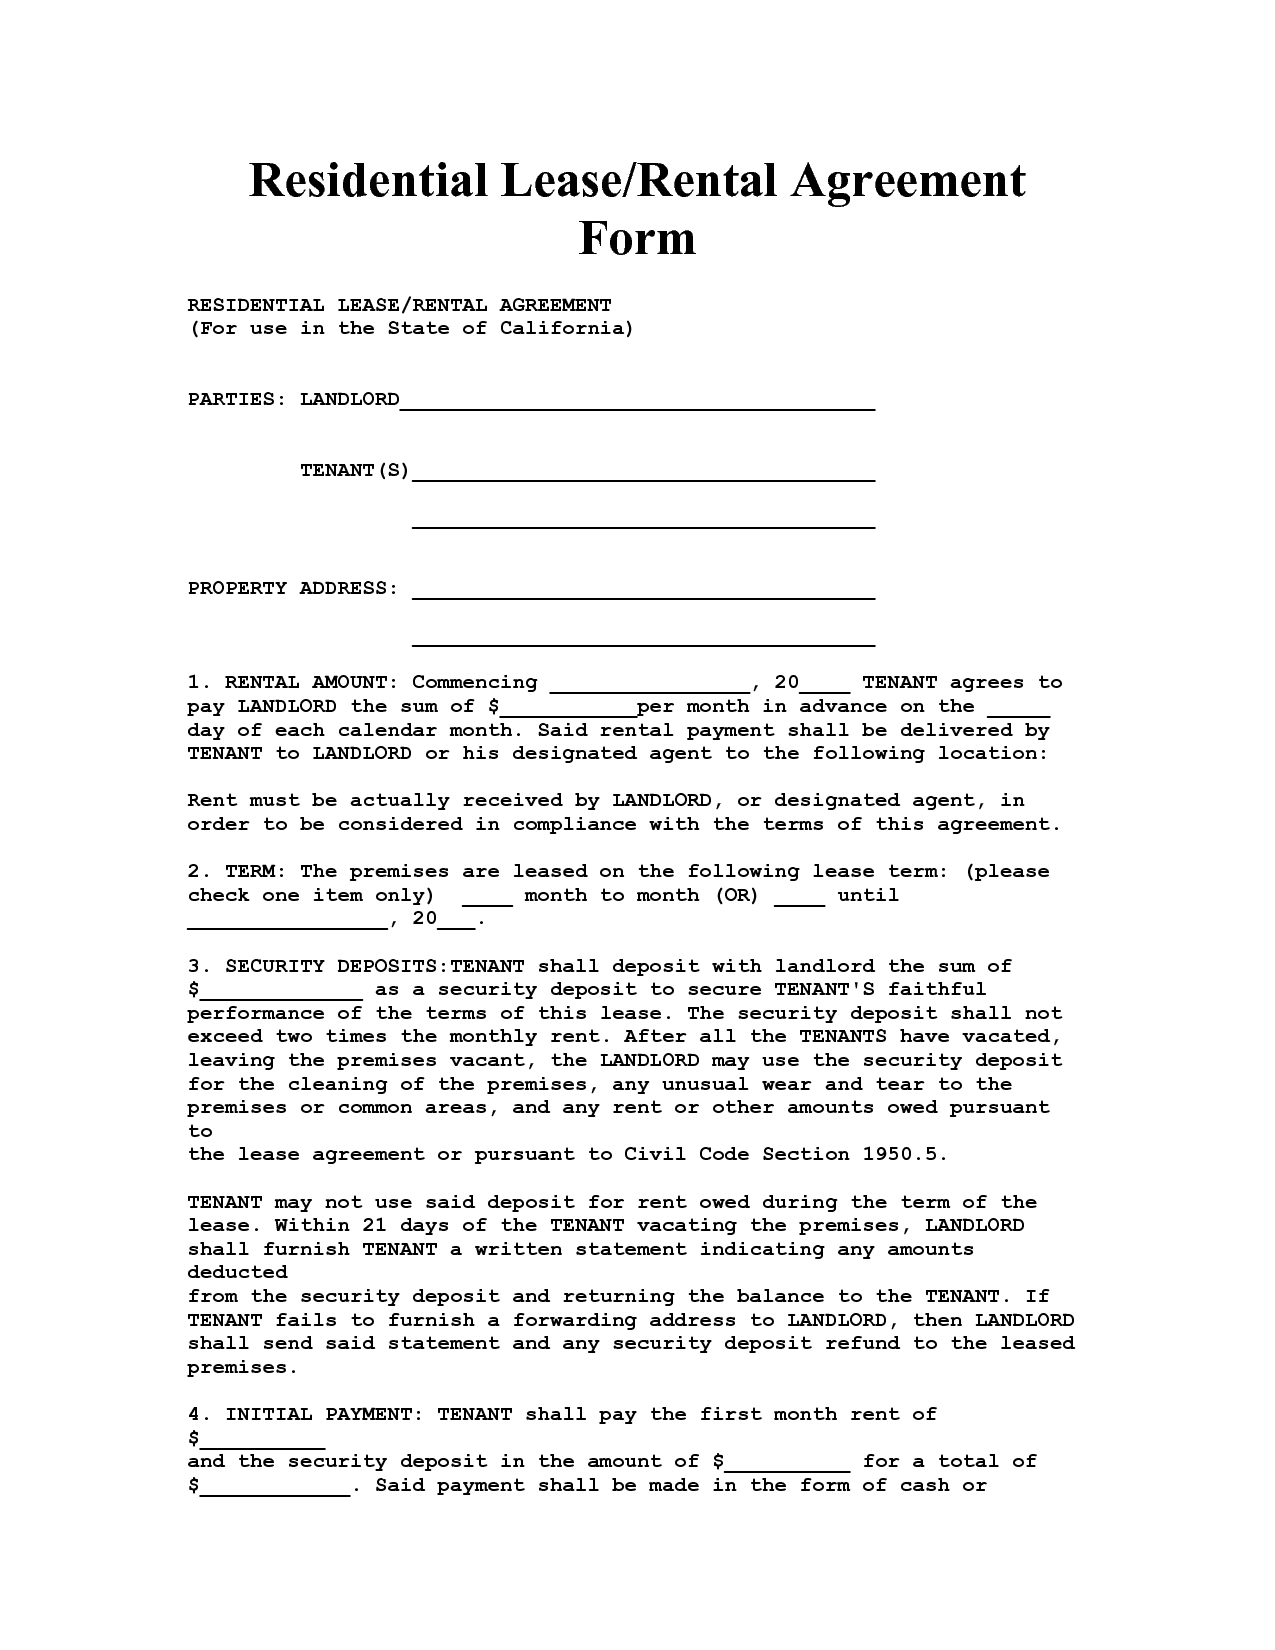 Room Rental Agreement Form 017 Template Free Room Rental Lease Agreement For Rentalfree Ideas